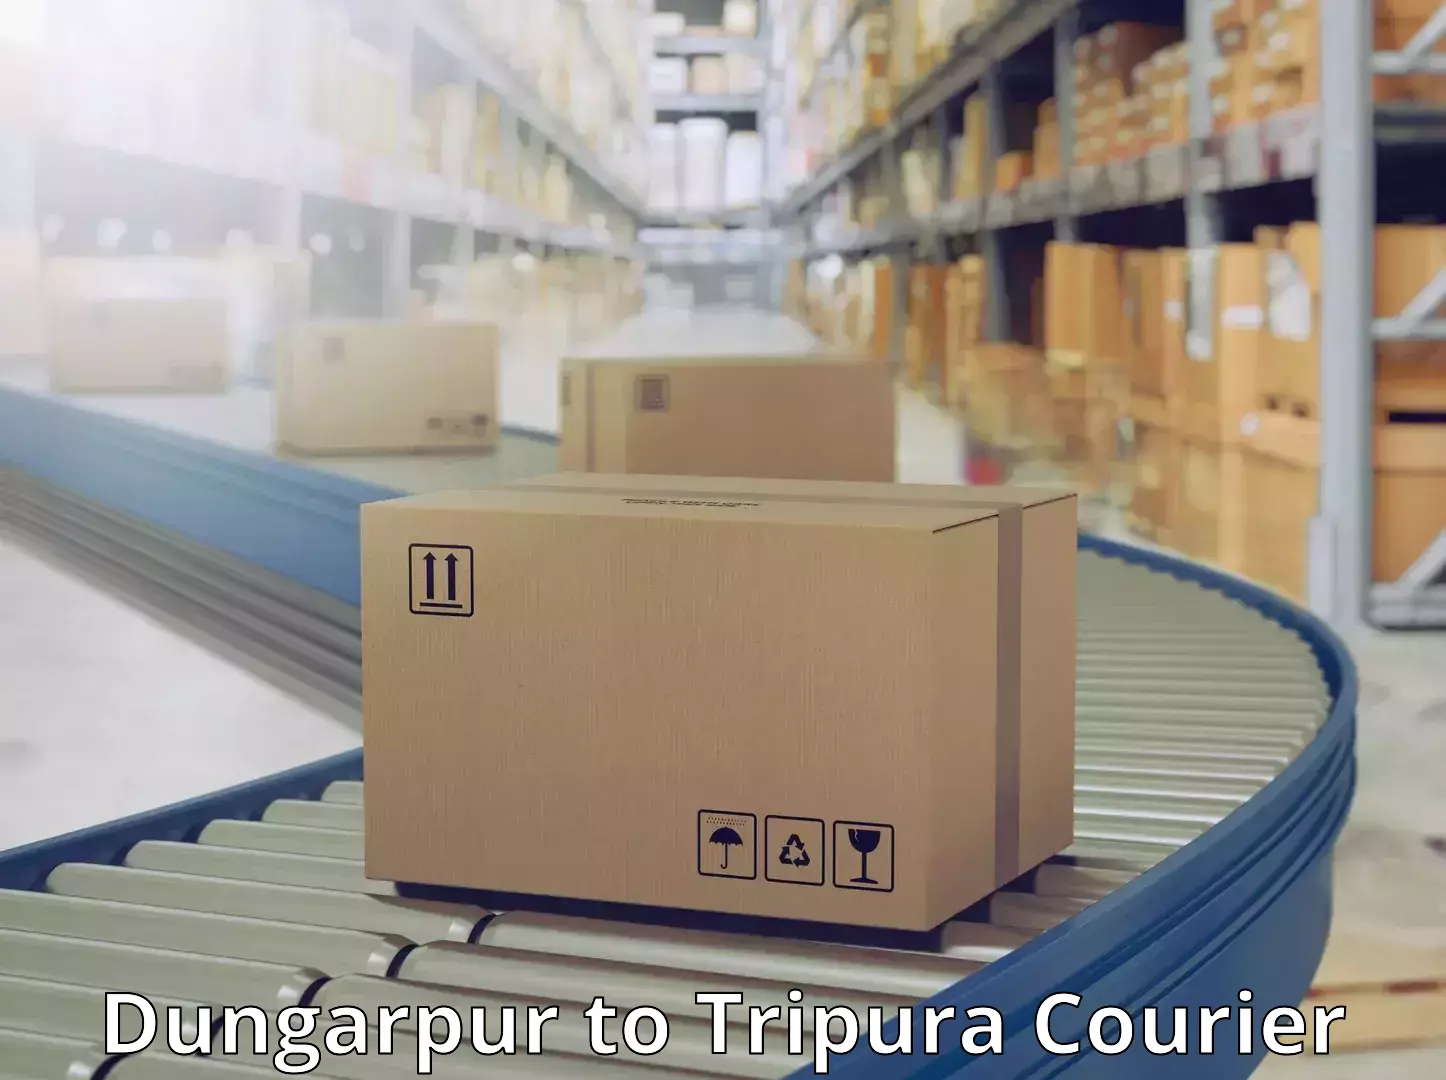 Full-service courier options Dungarpur to Agartala